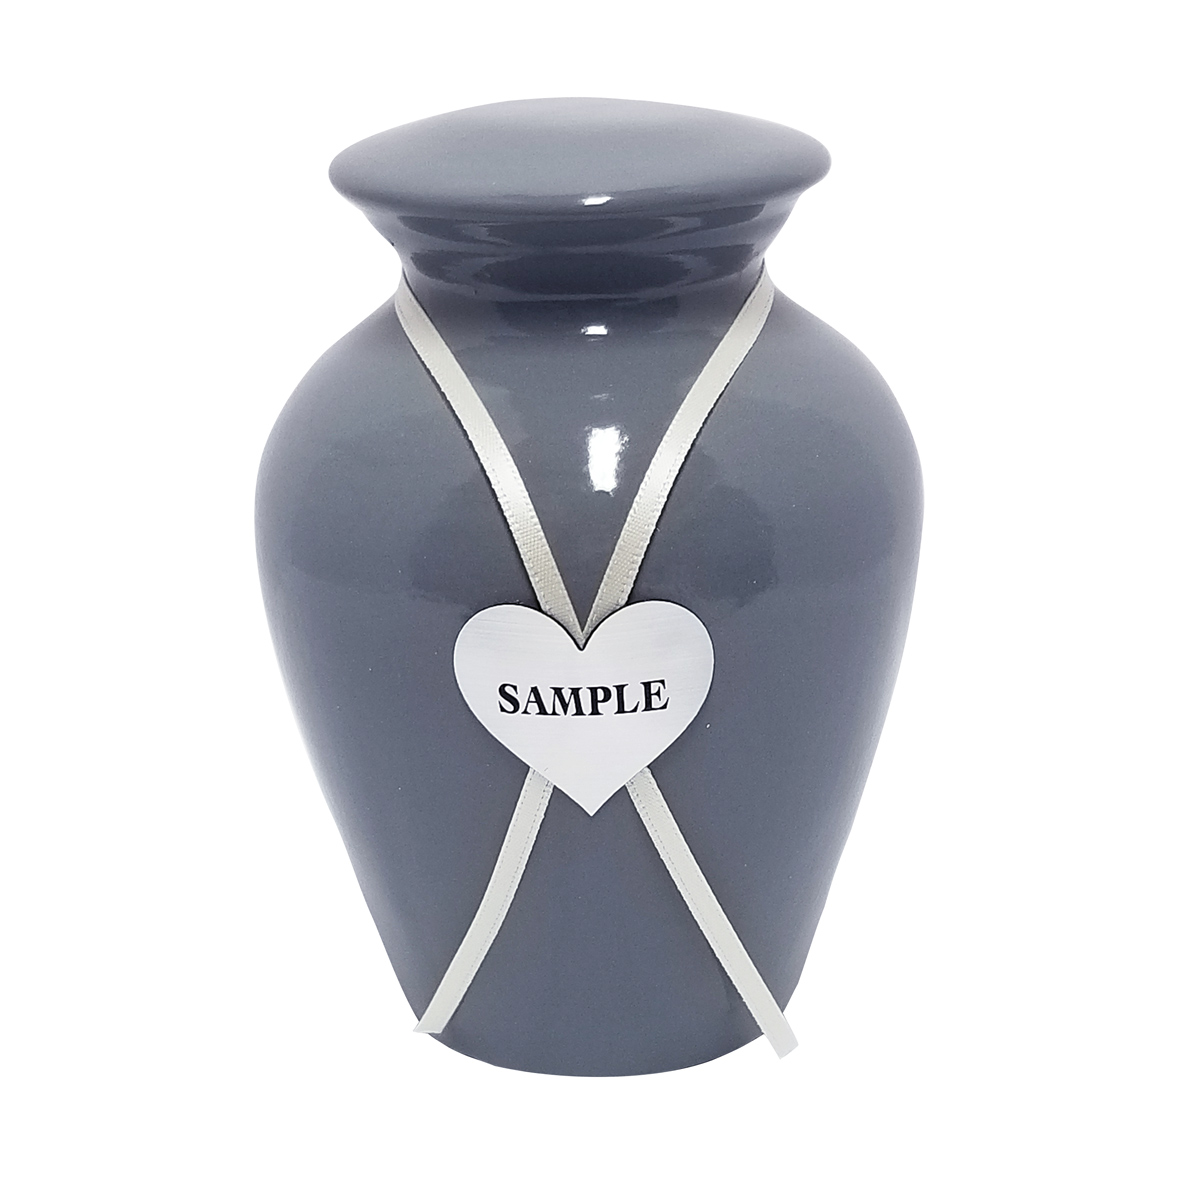 Ceramic with Engraved Heart Plaque